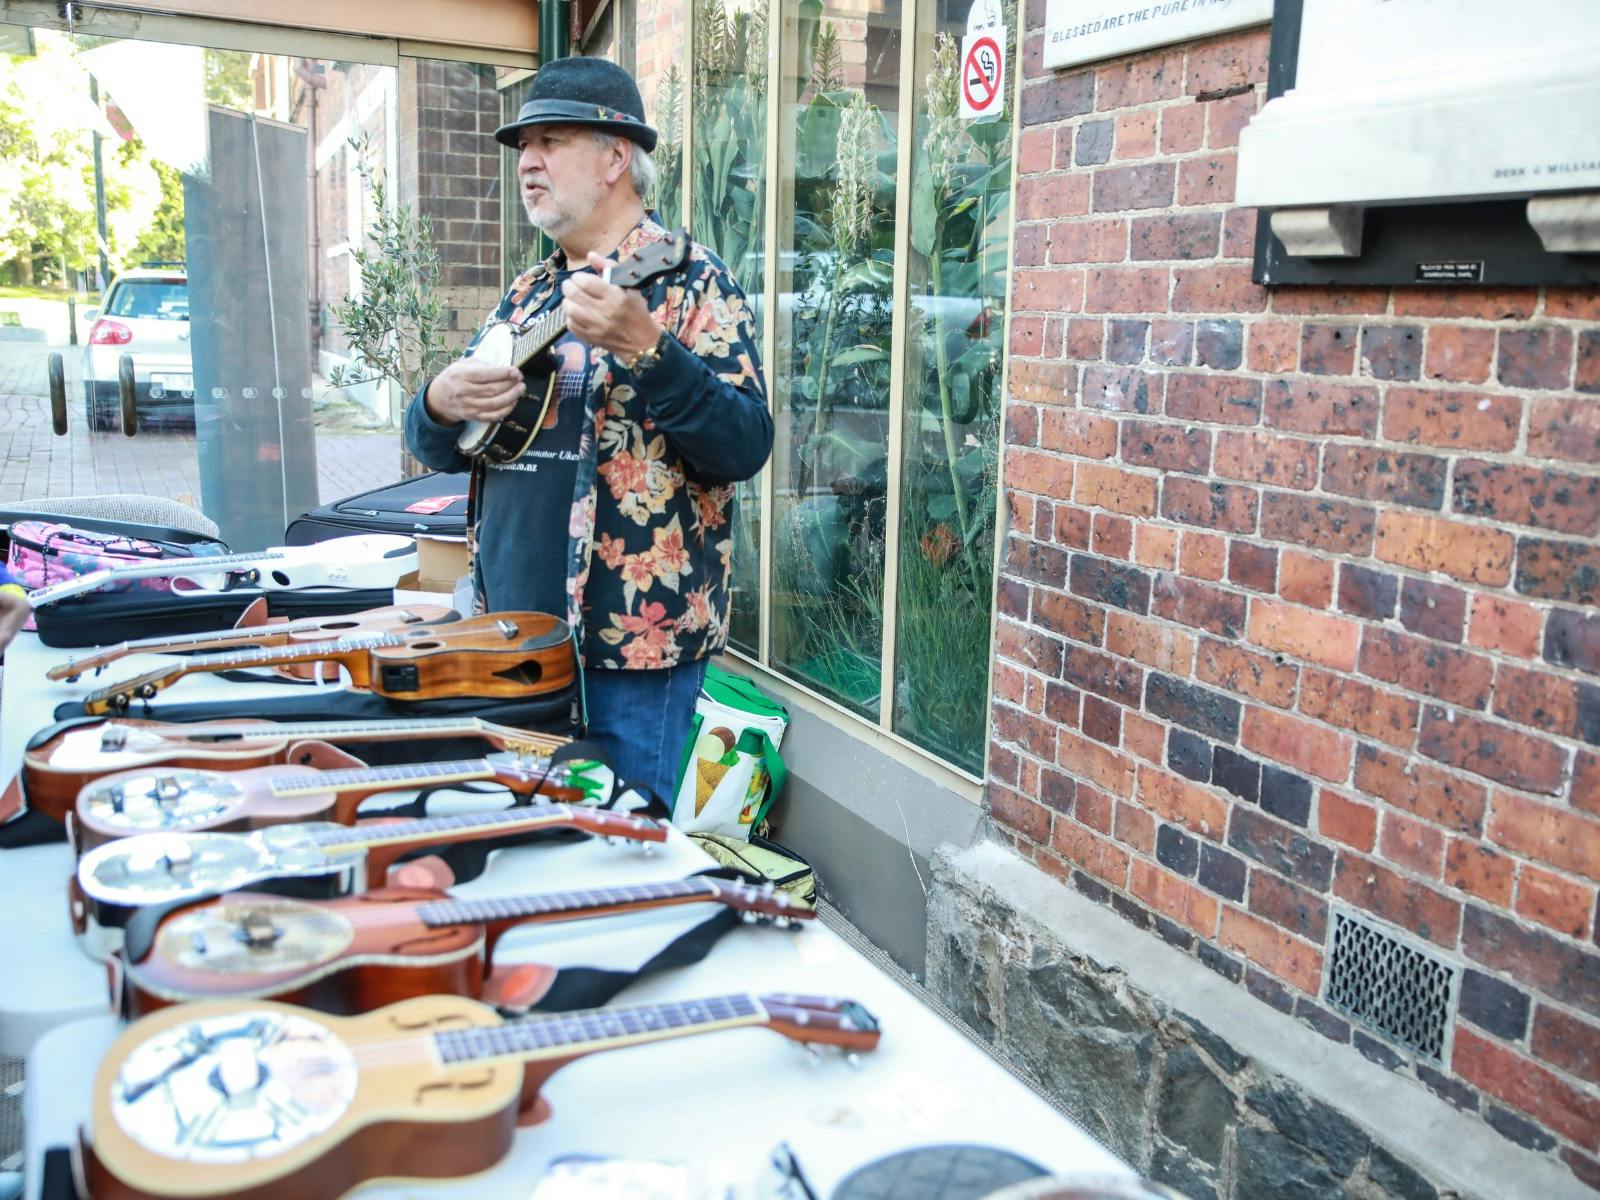 Table displaying a range of ukuleles including resonator style. Luthier standing behind stall.